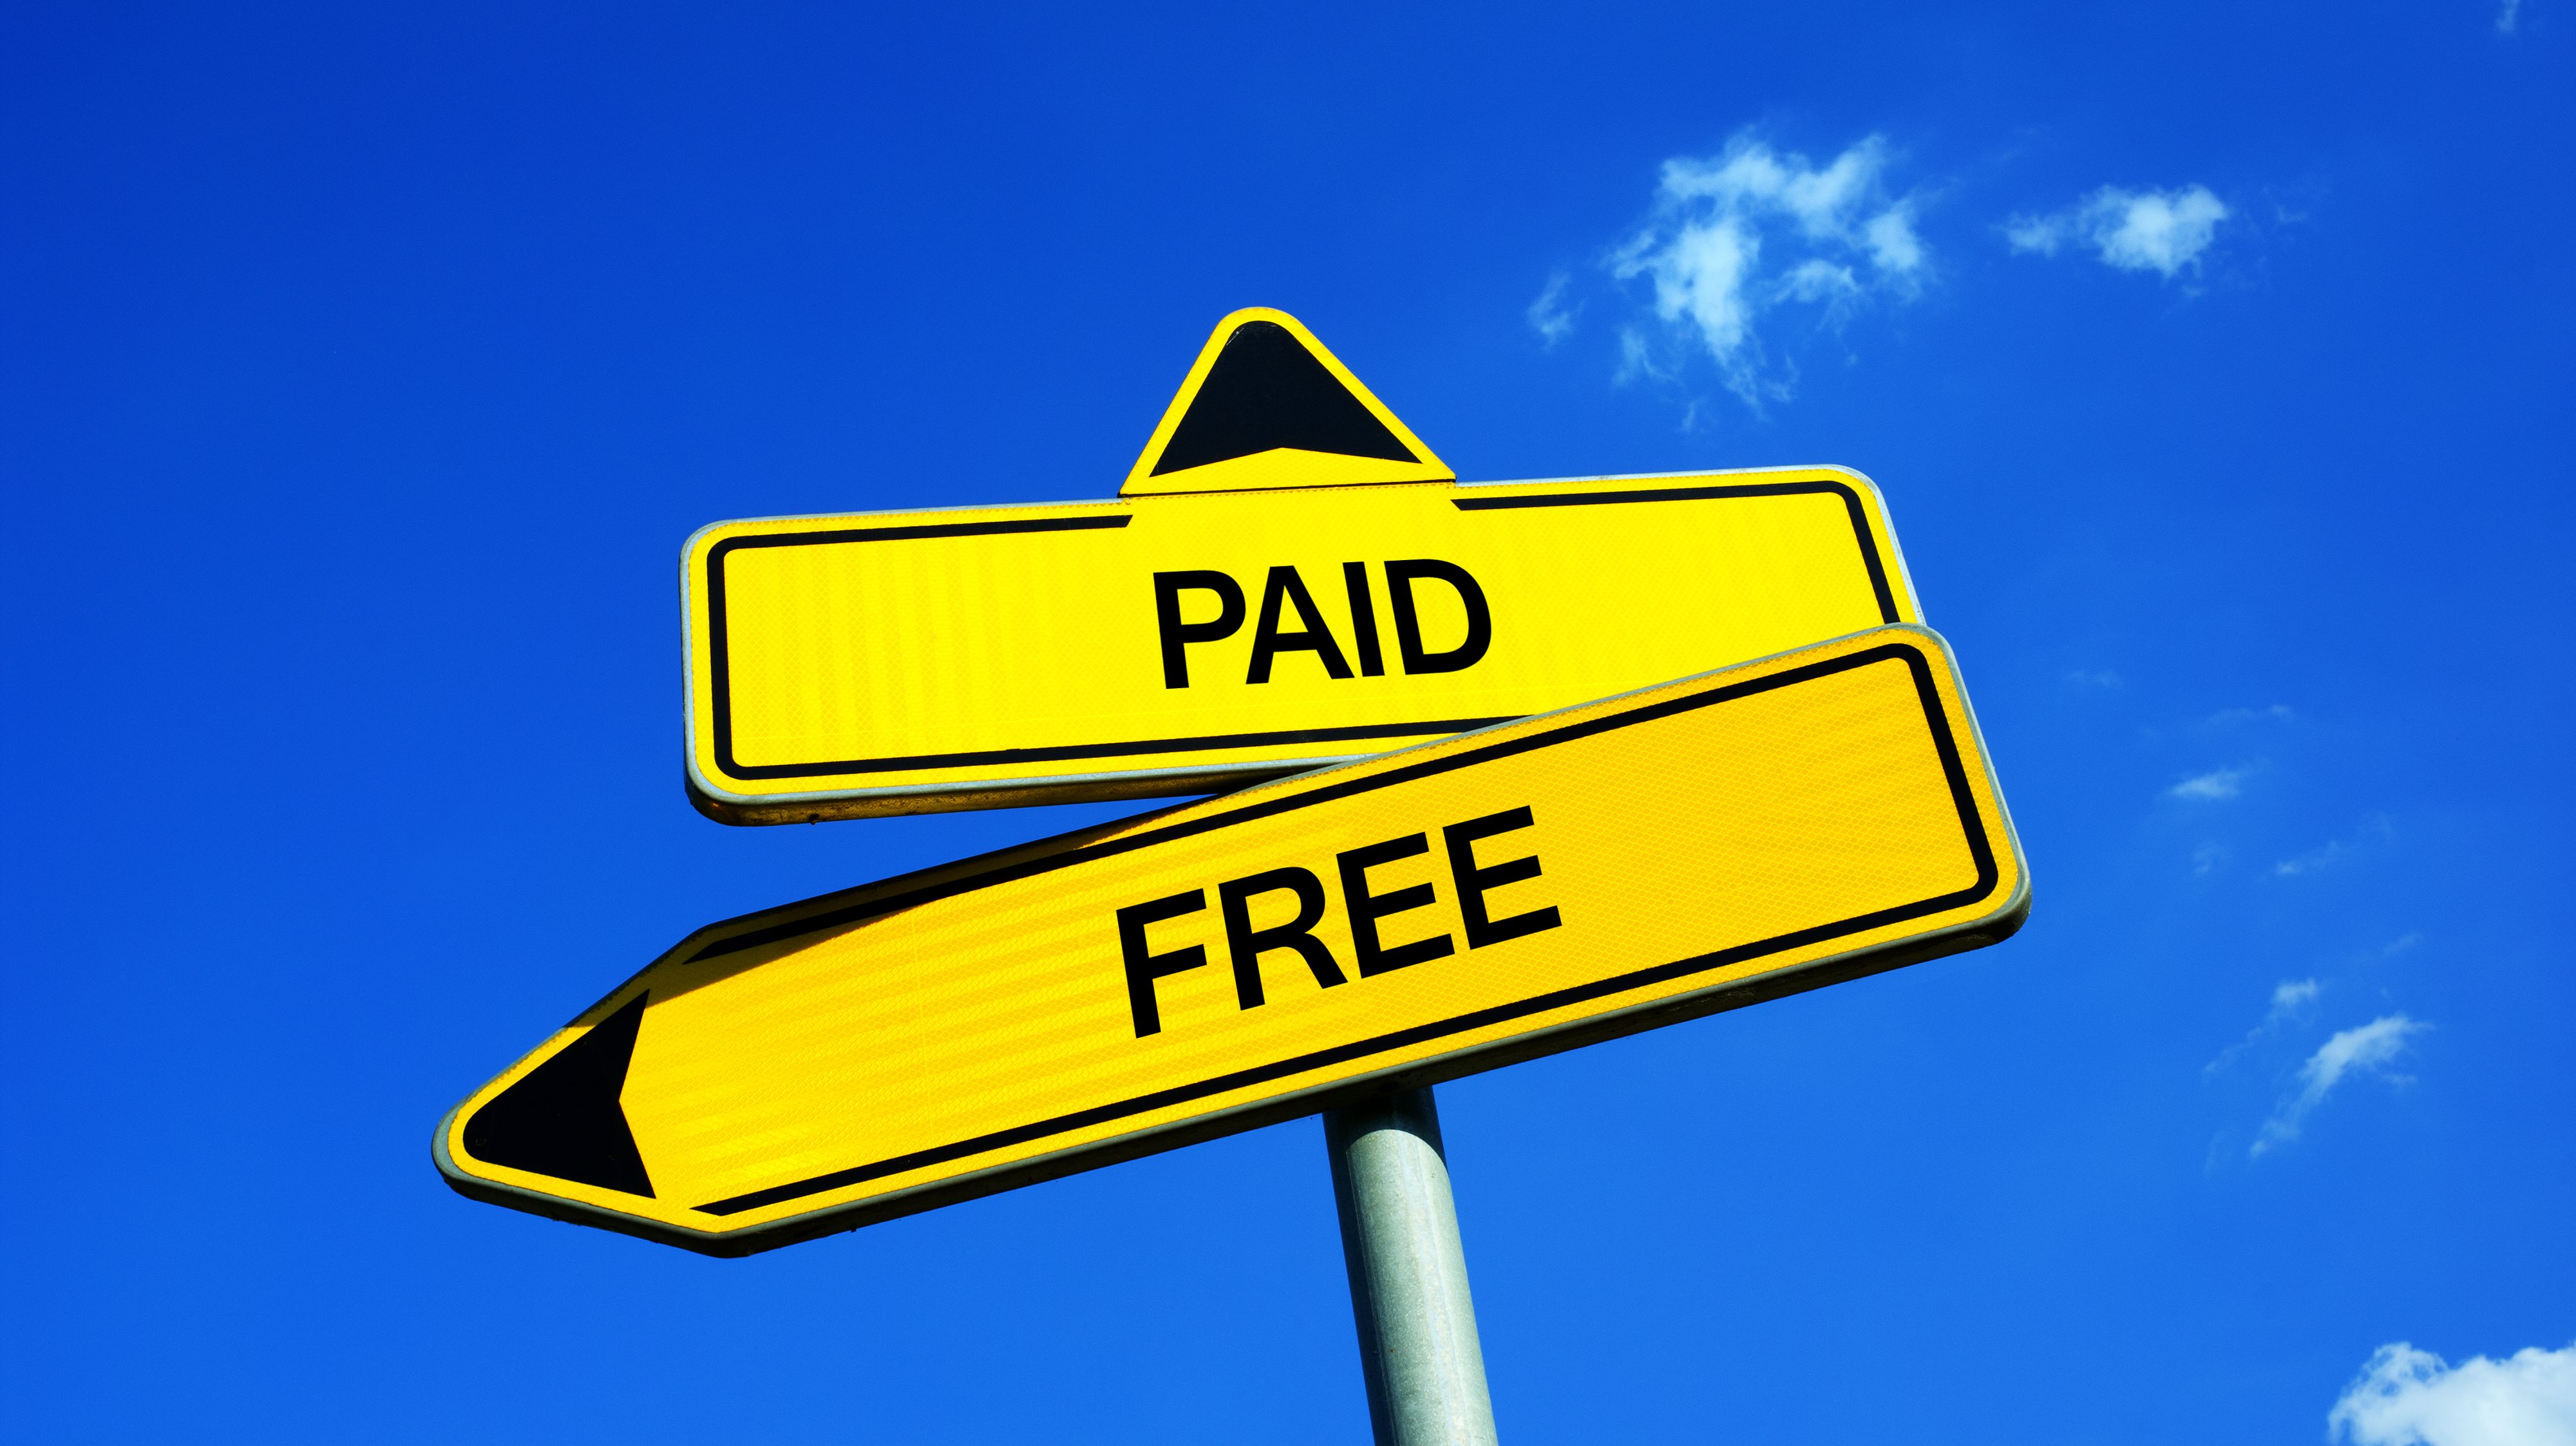 Free Or Paid For Rehabilitation In The Uk